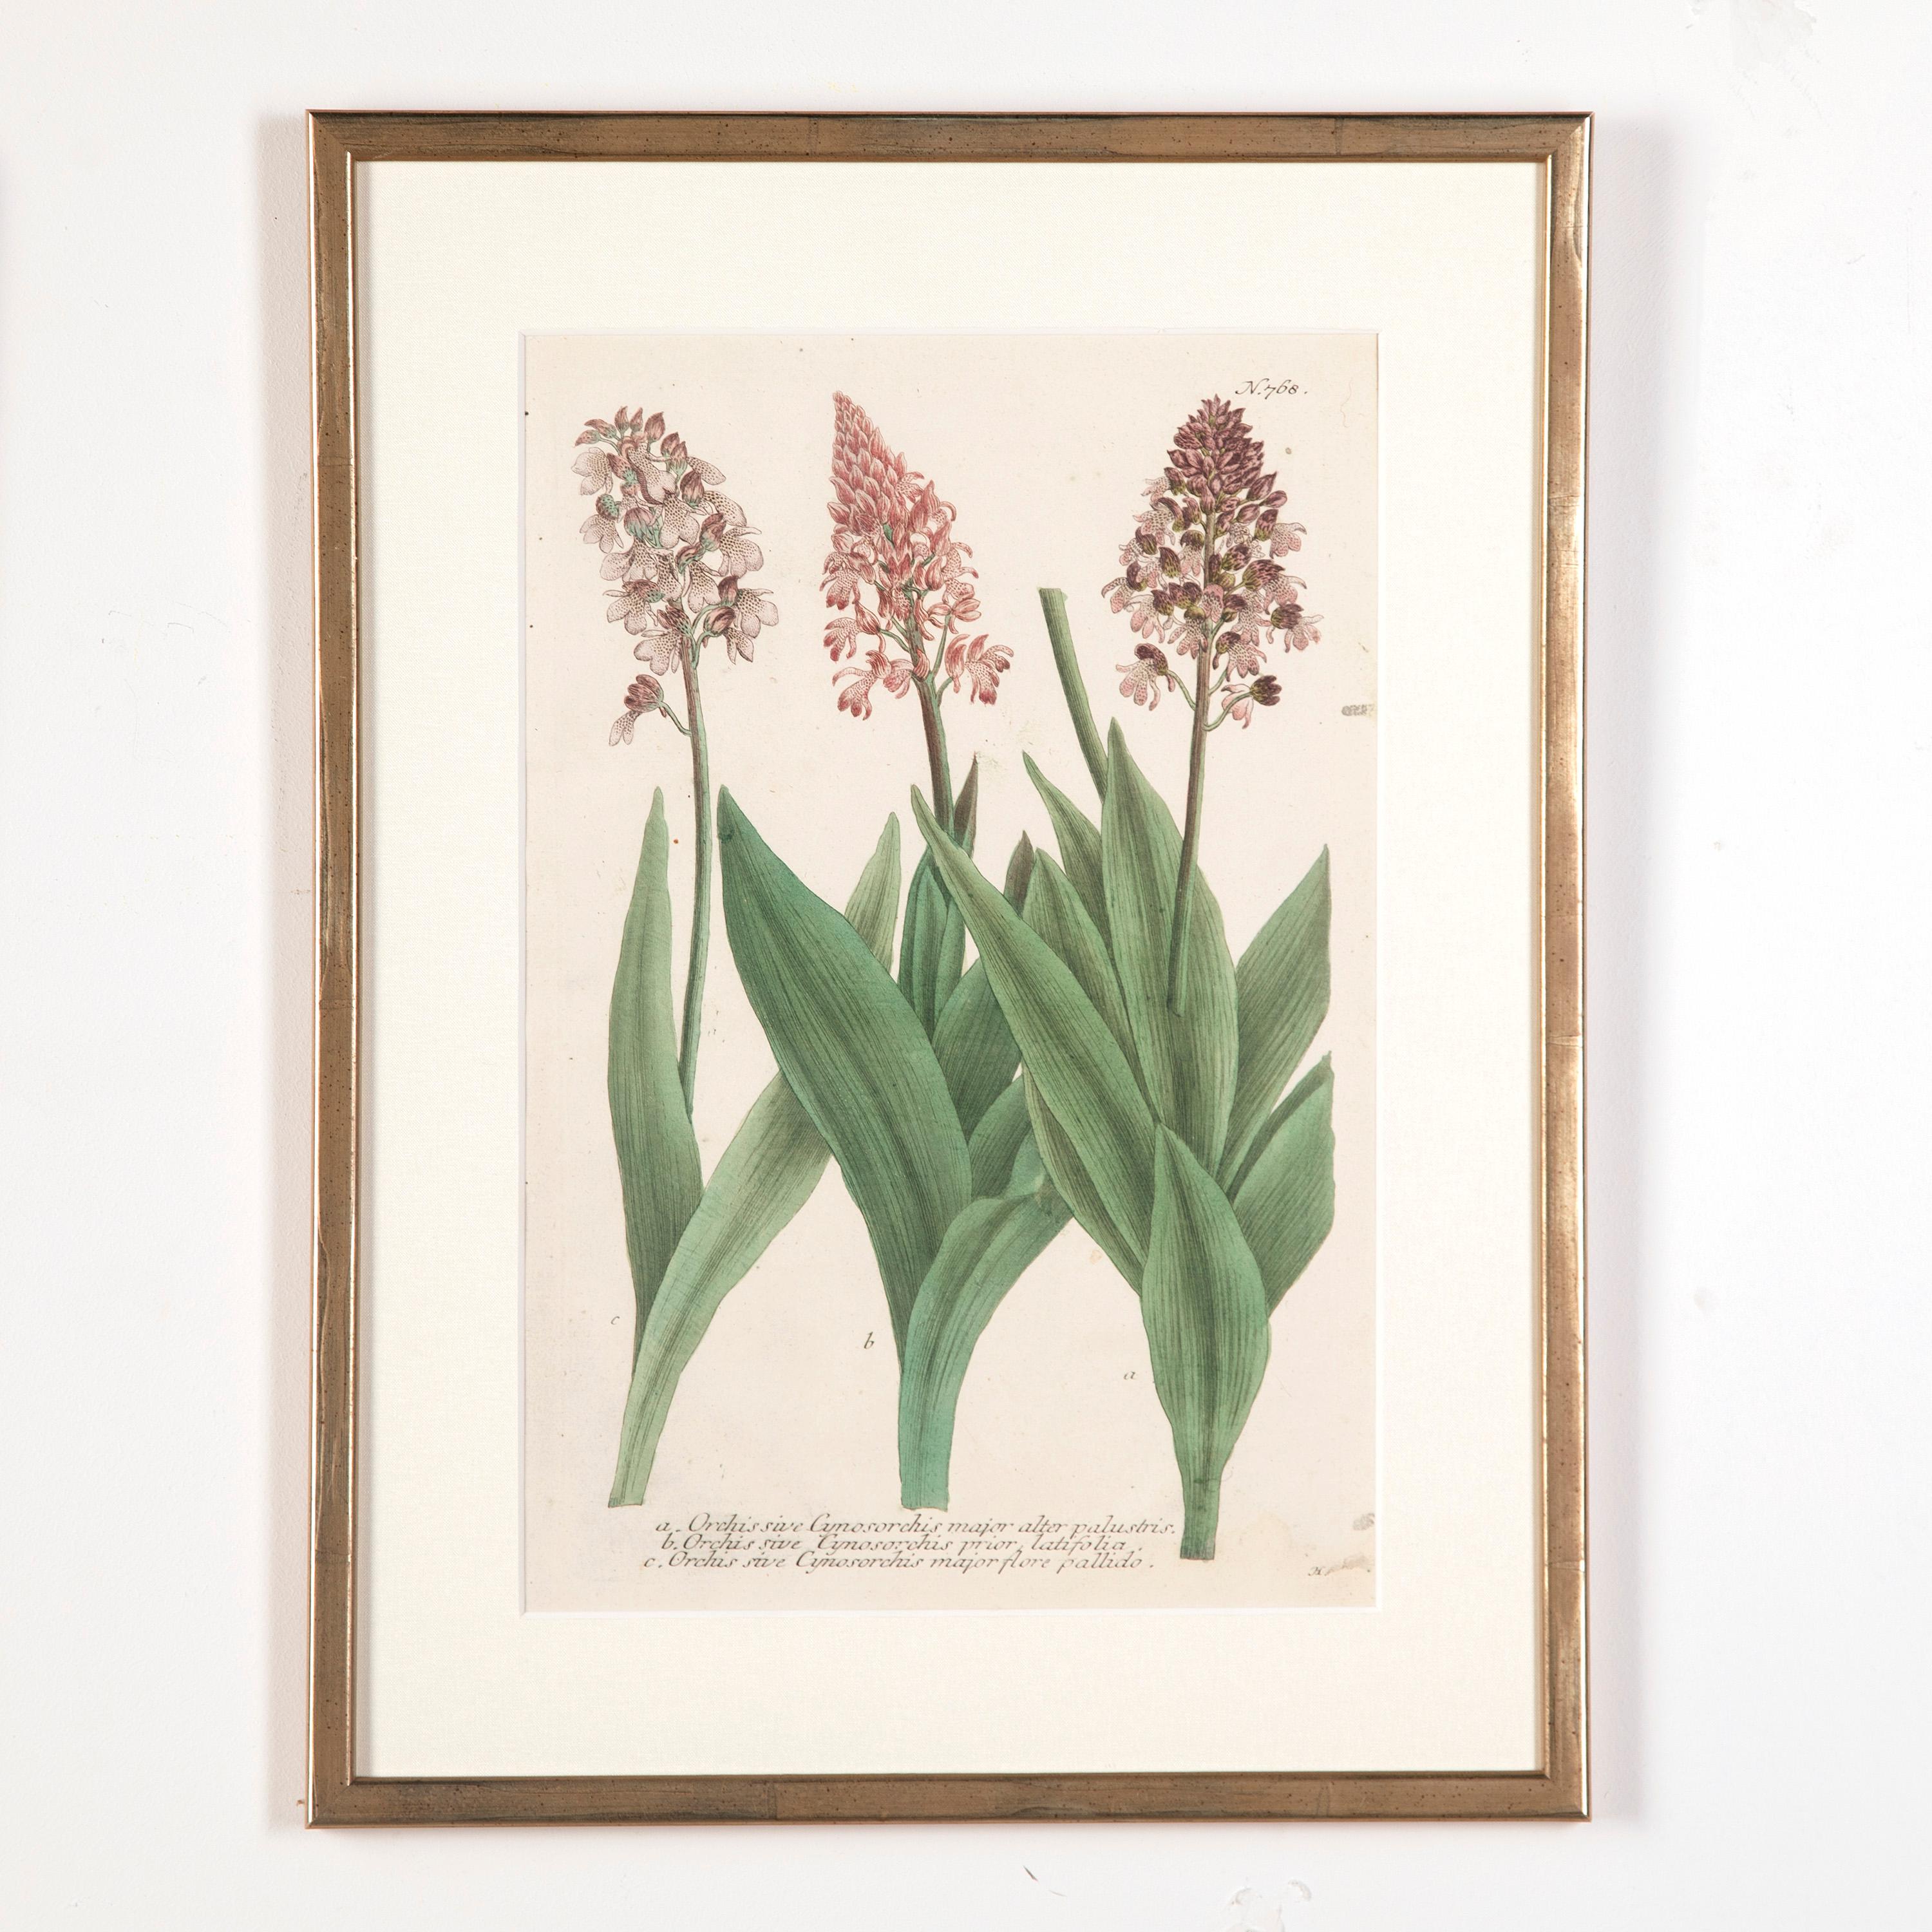 Set of six original 18th century hand coloured botanical prints by Johann Weinmann.

Weinmann's work is beautifully recorded and includes wonderful displays of 18th Century flowers, fruits, and vegetables. The methods behind the work were